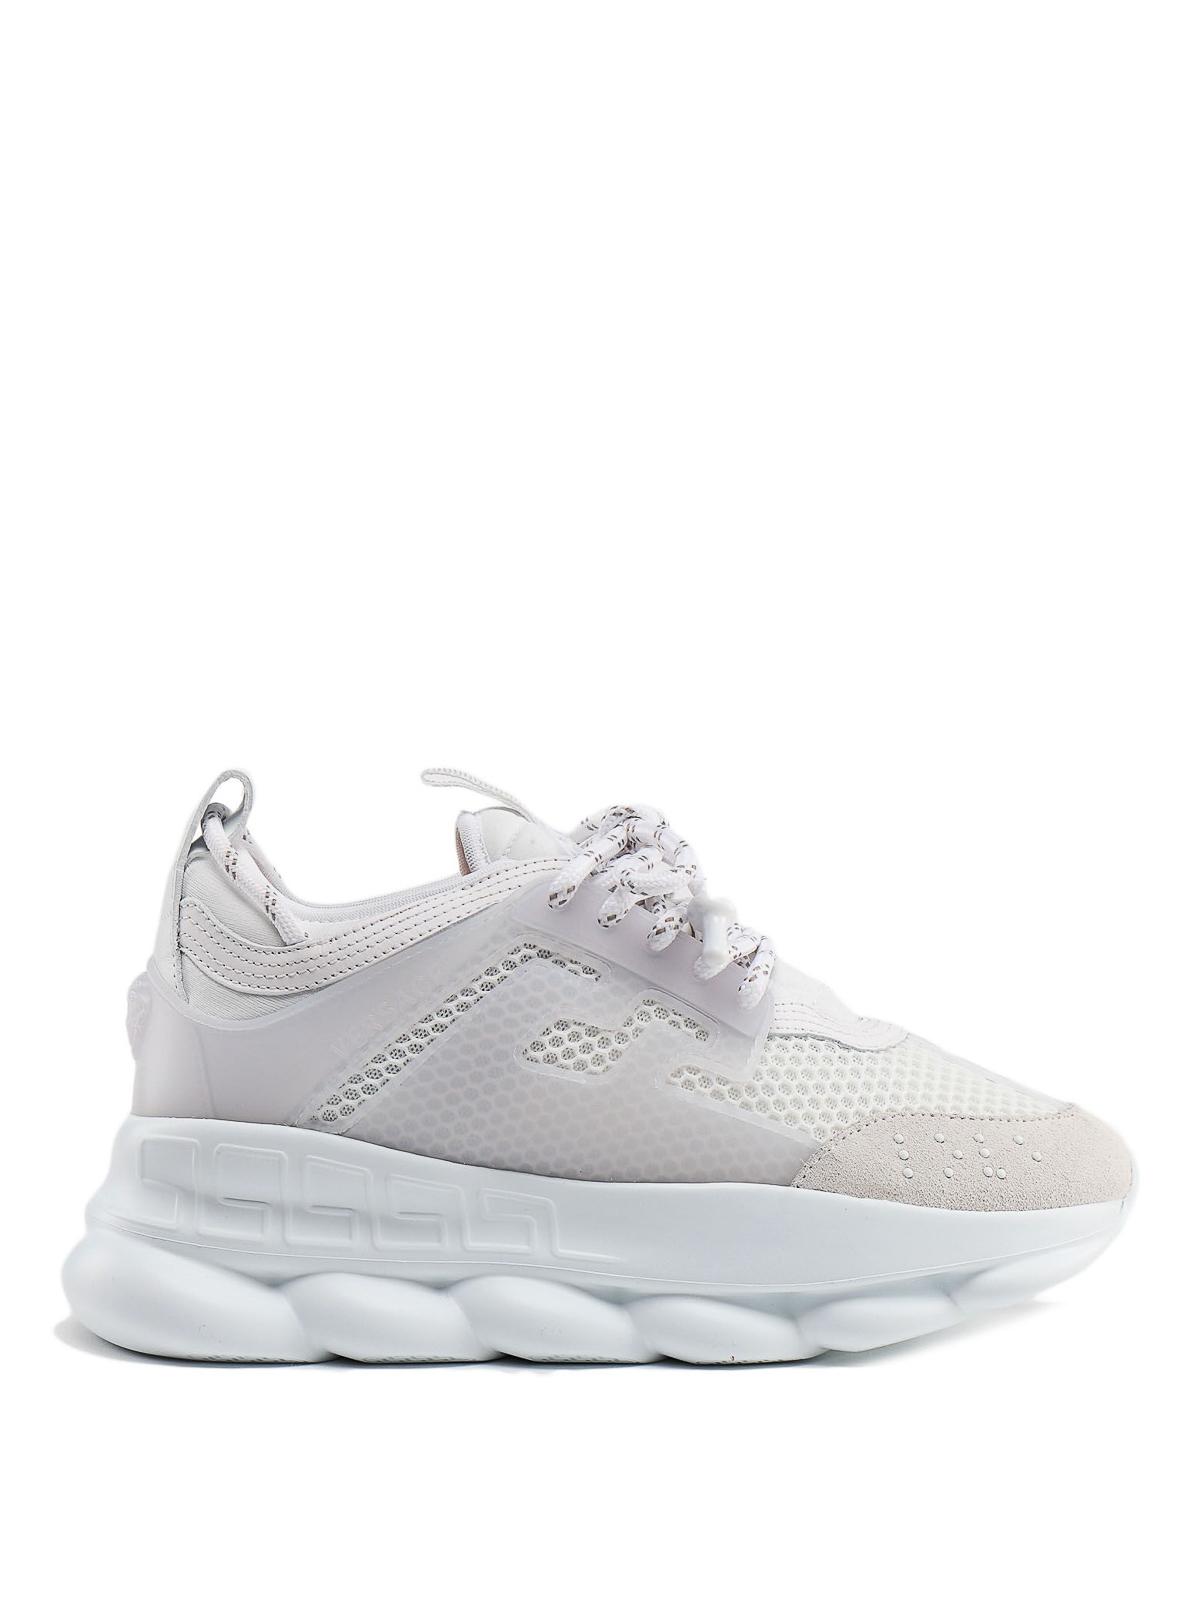 Versace Chain Reaction Sneakers in White - Lyst